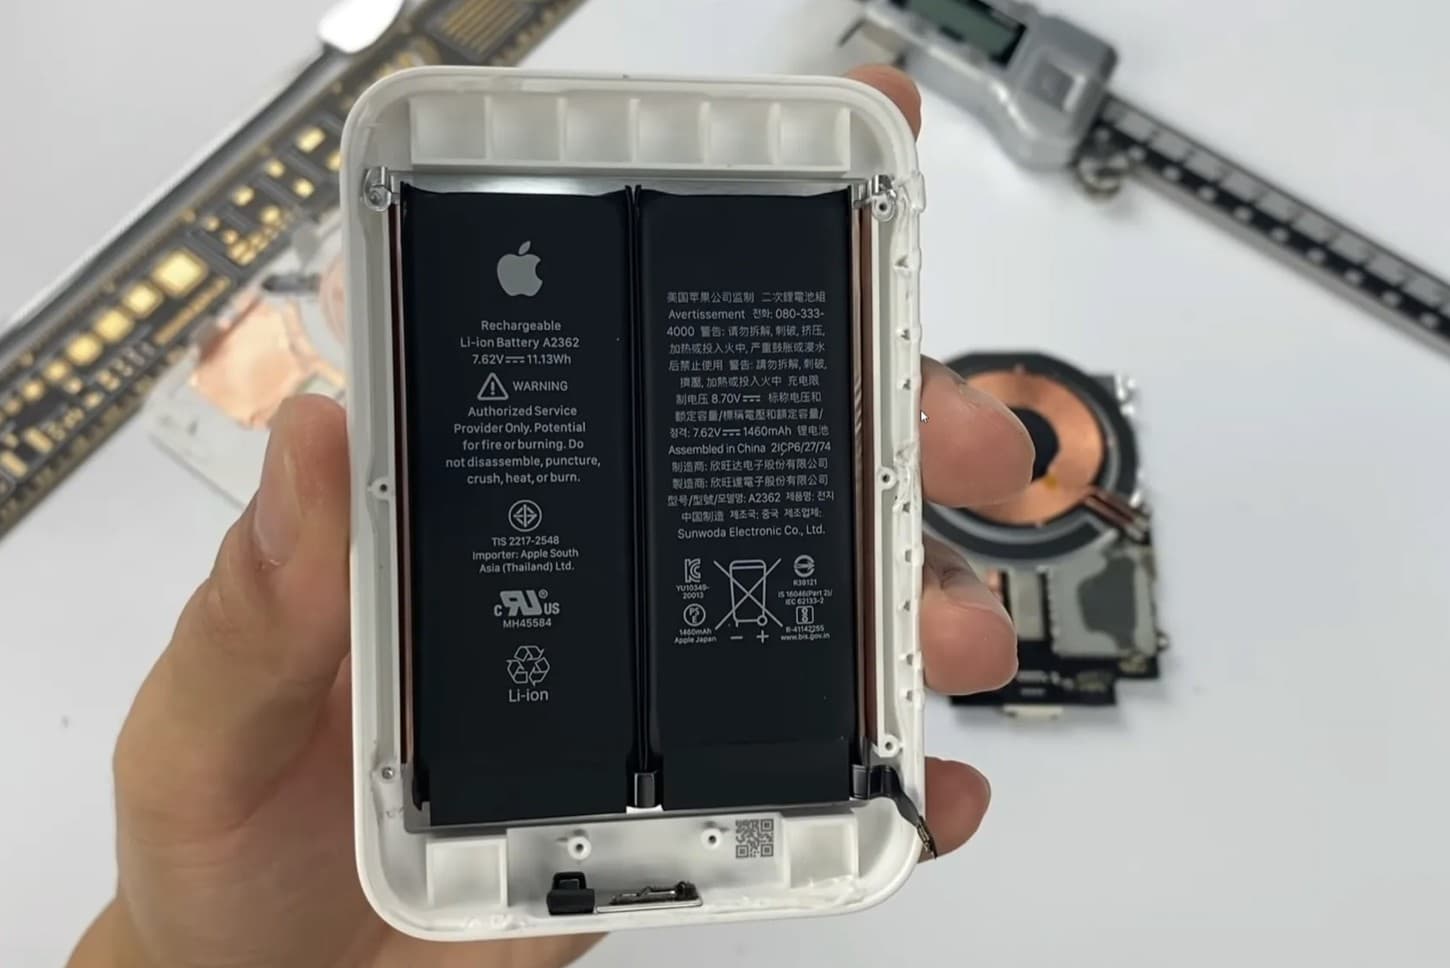 MagSafe Battery Pack teardown: ChargerLAB tore into Apple's new MagSafe Battery Pack. Literally.